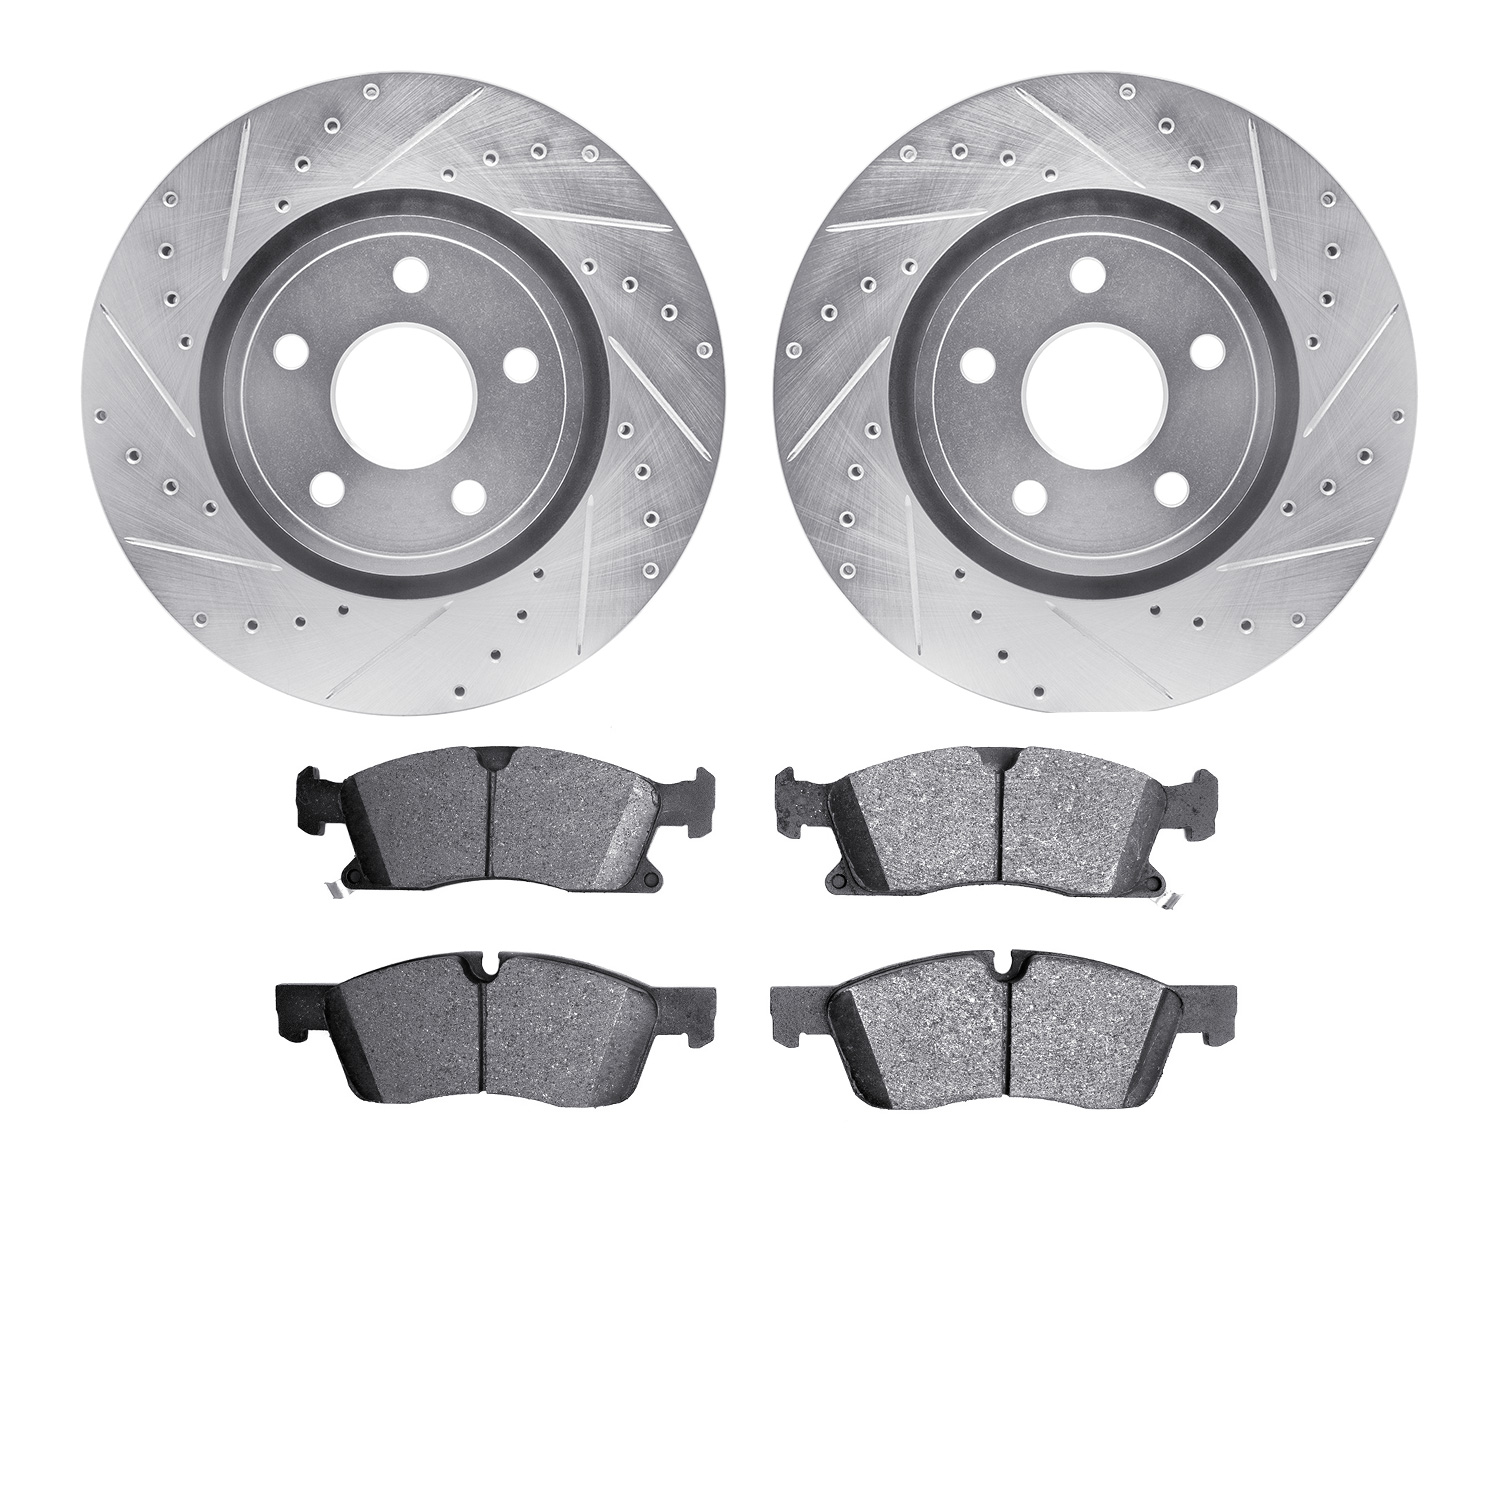 7402-42009 Drilled/Slotted Brake Rotors with Ultimate-Duty Brake Pads Kit [Silver], Fits Select Mopar, Position: Front